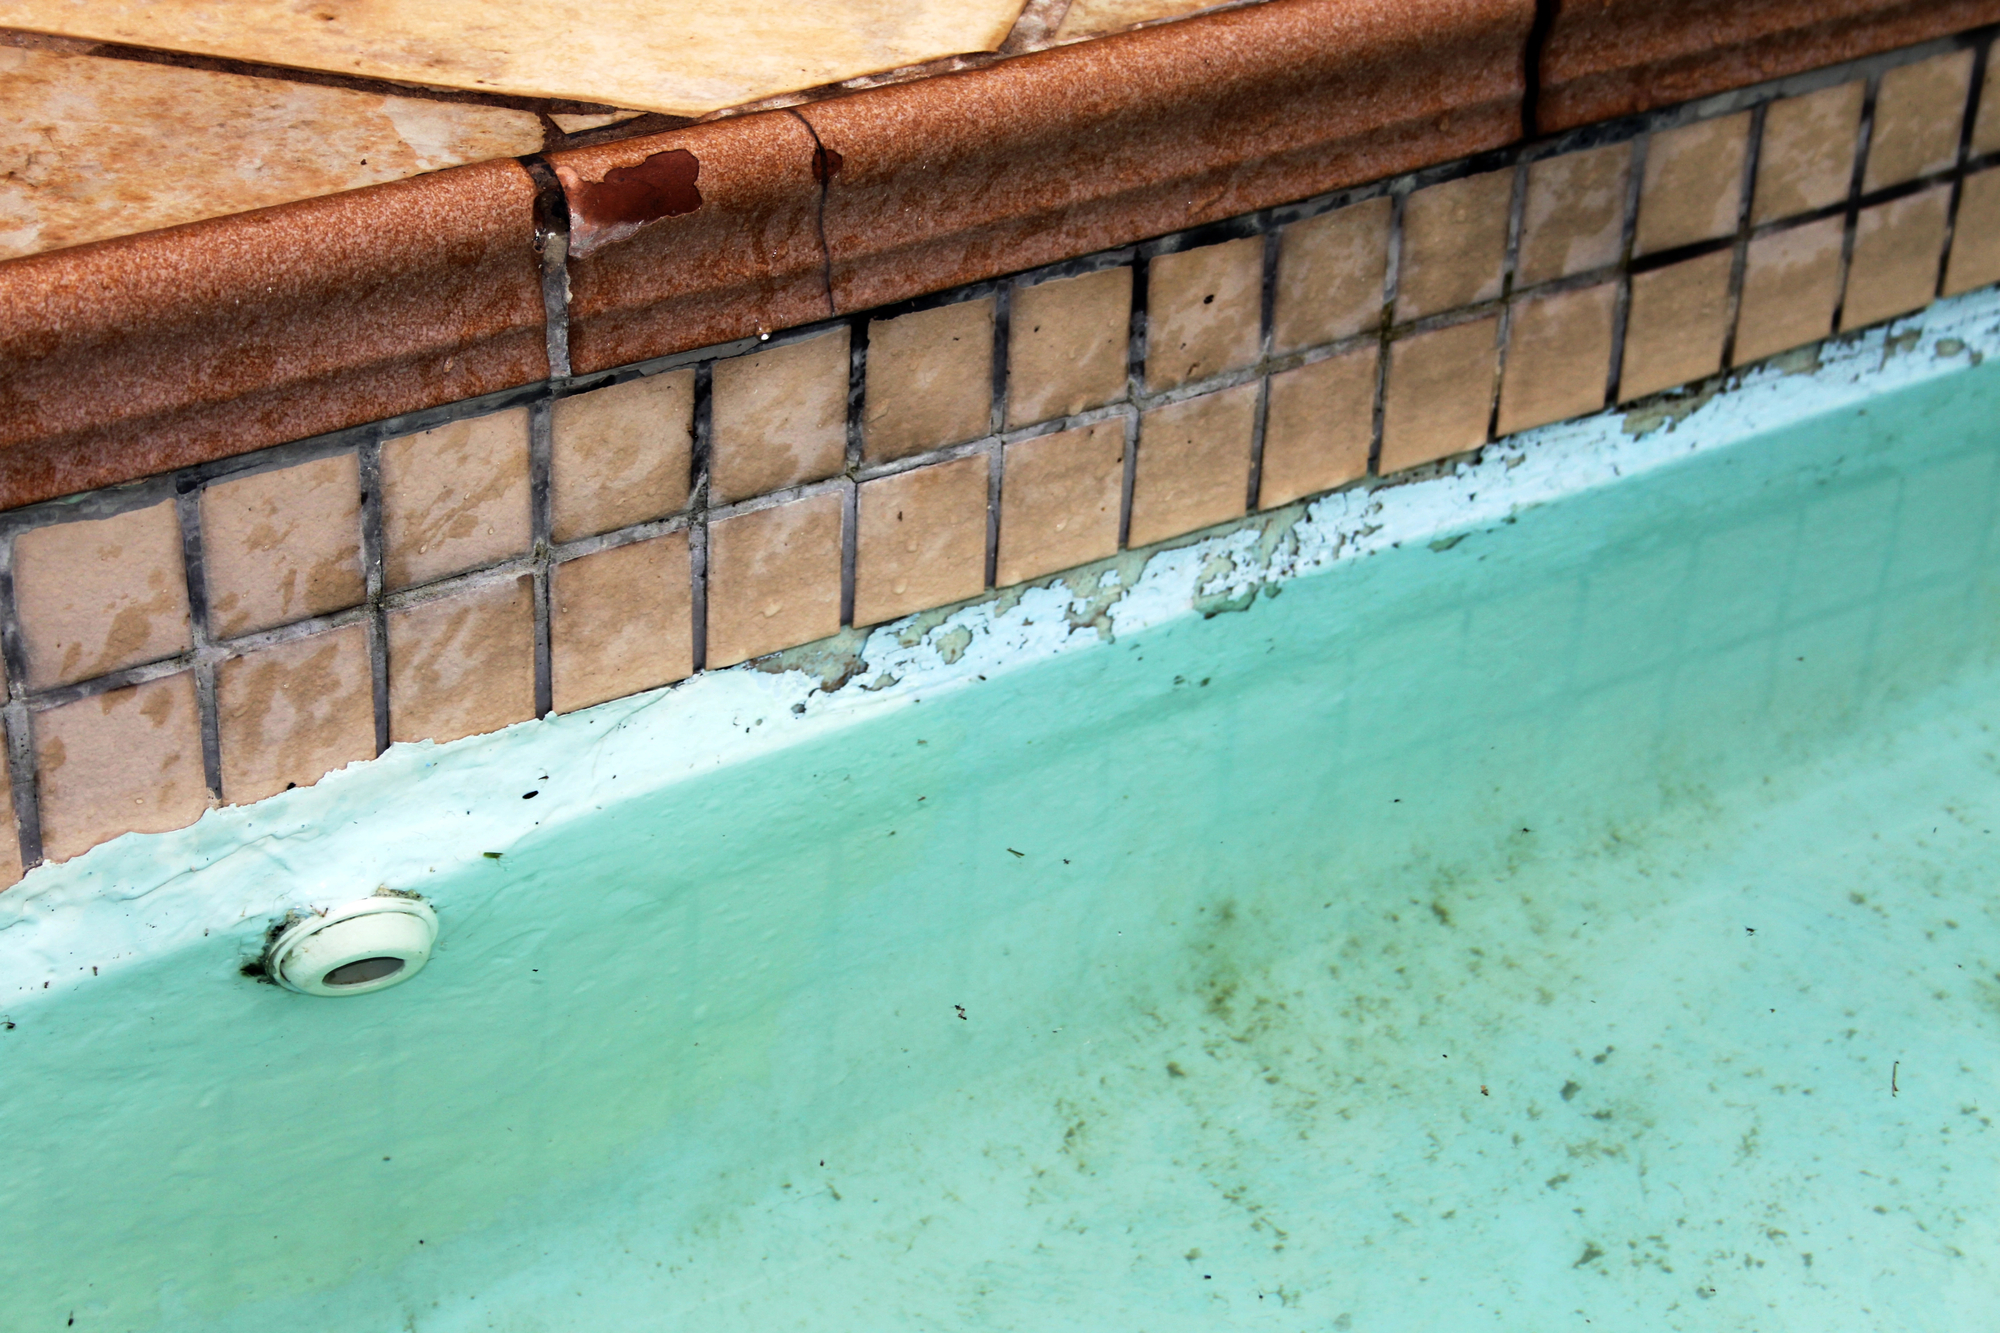 Visible damage and discoloration on swimming pool tiles indicating potential leakage